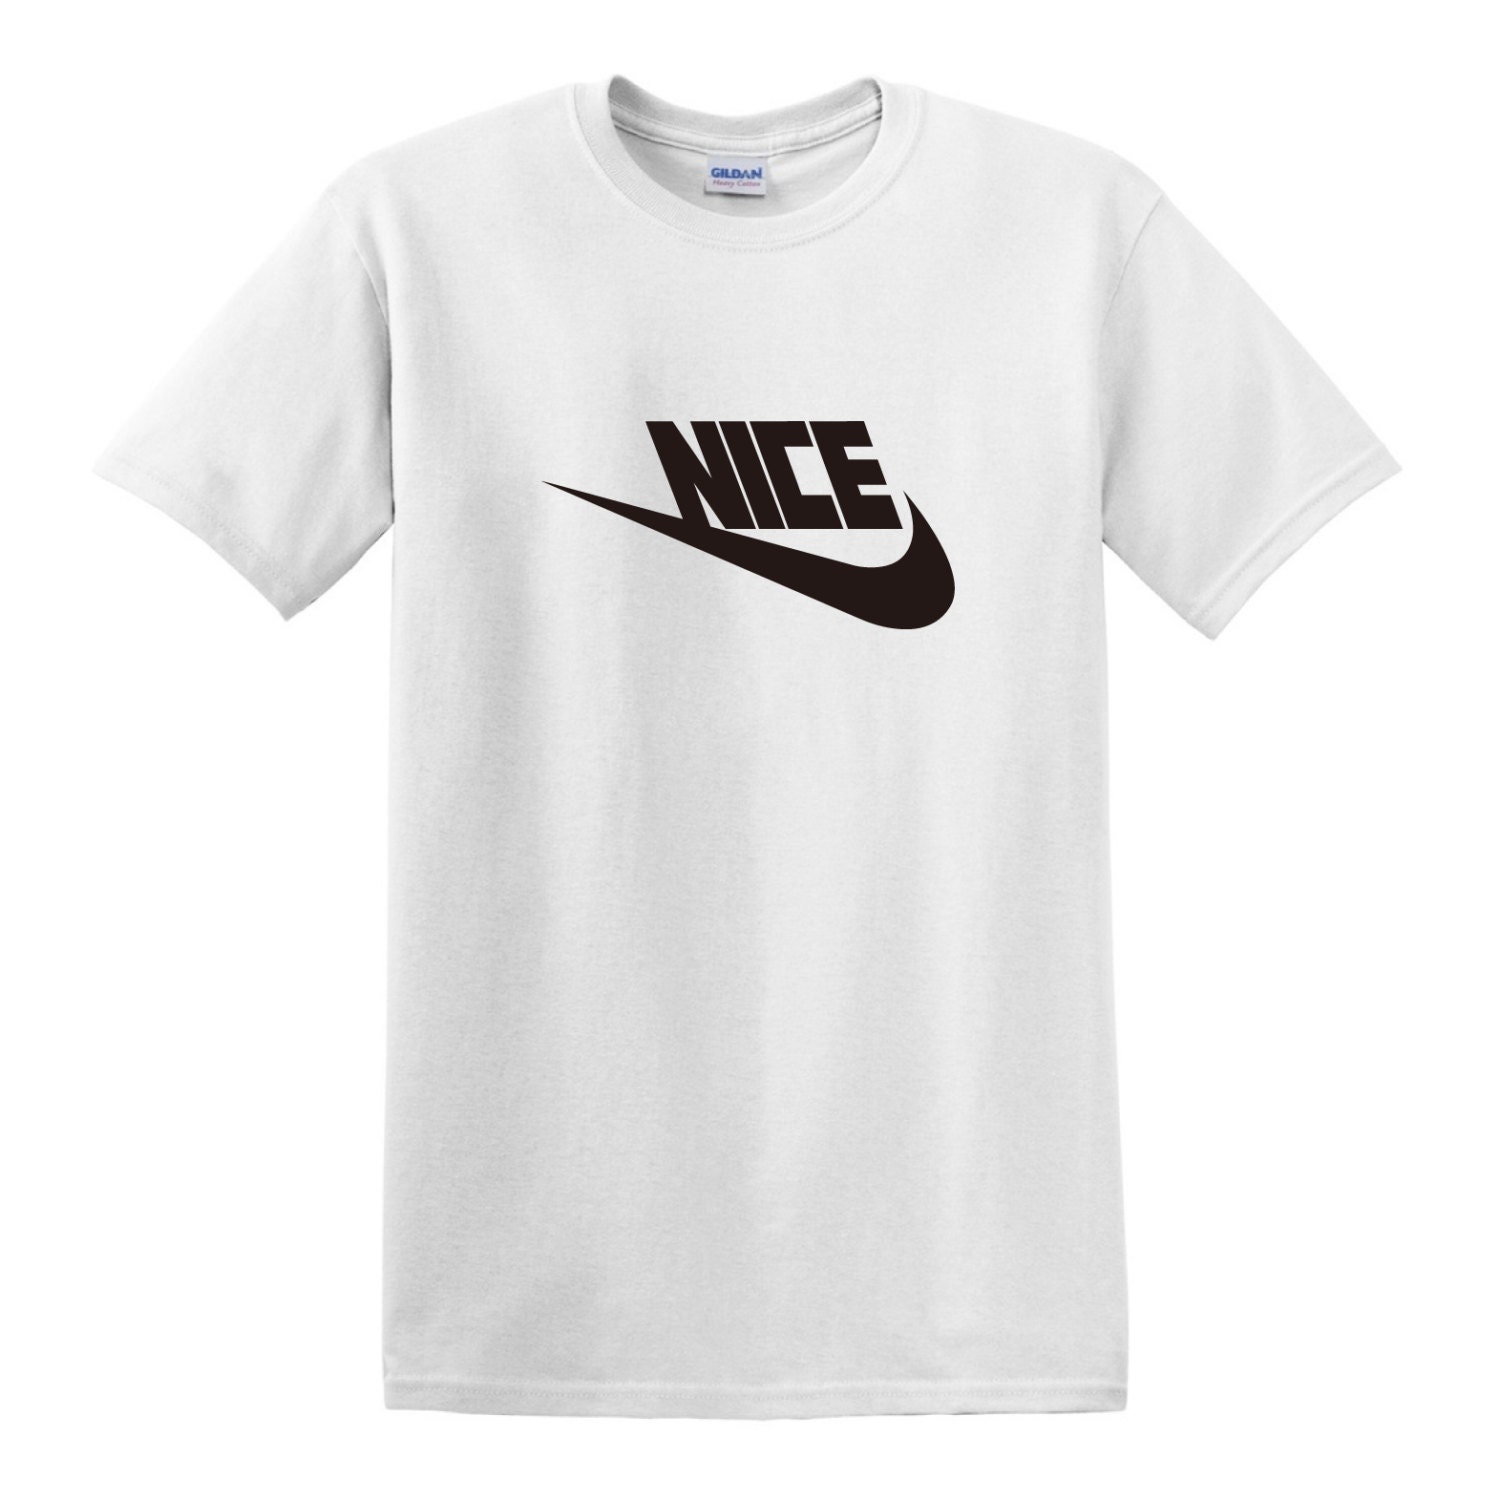 NIKE STYLE NICE White Color Short Sleeve Cotton T-Shirt Tee